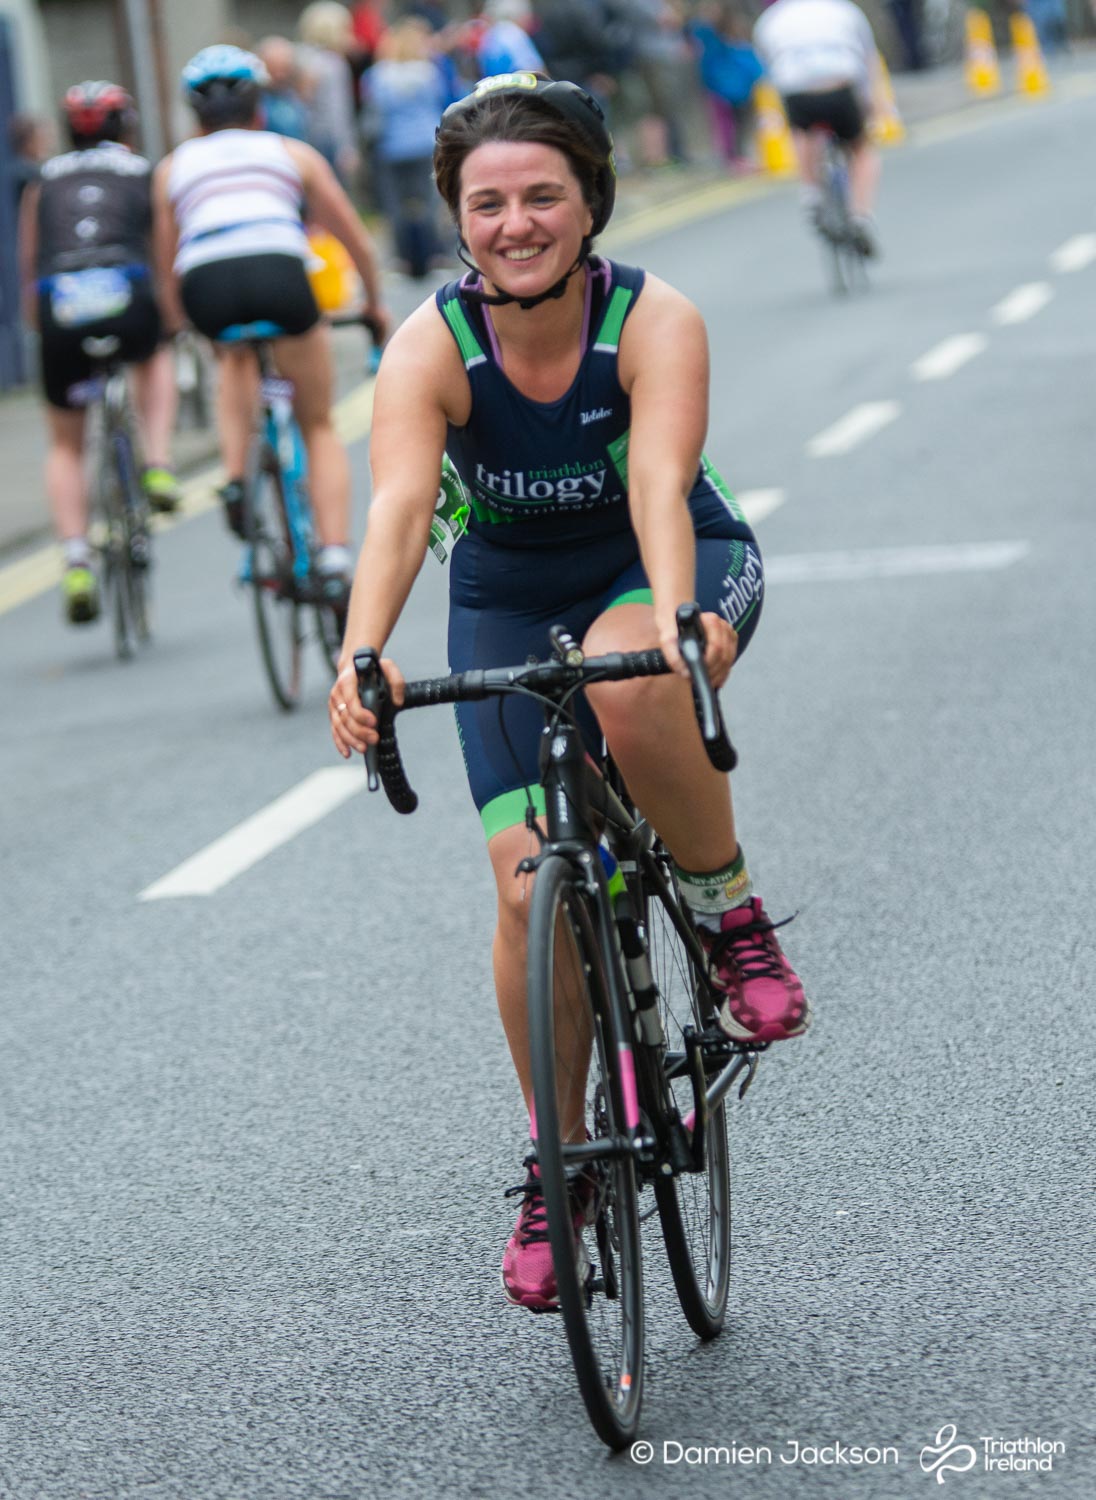 Athy_2018 (137 of 526) - TriAthy - XII Edition - 2nd June 2018